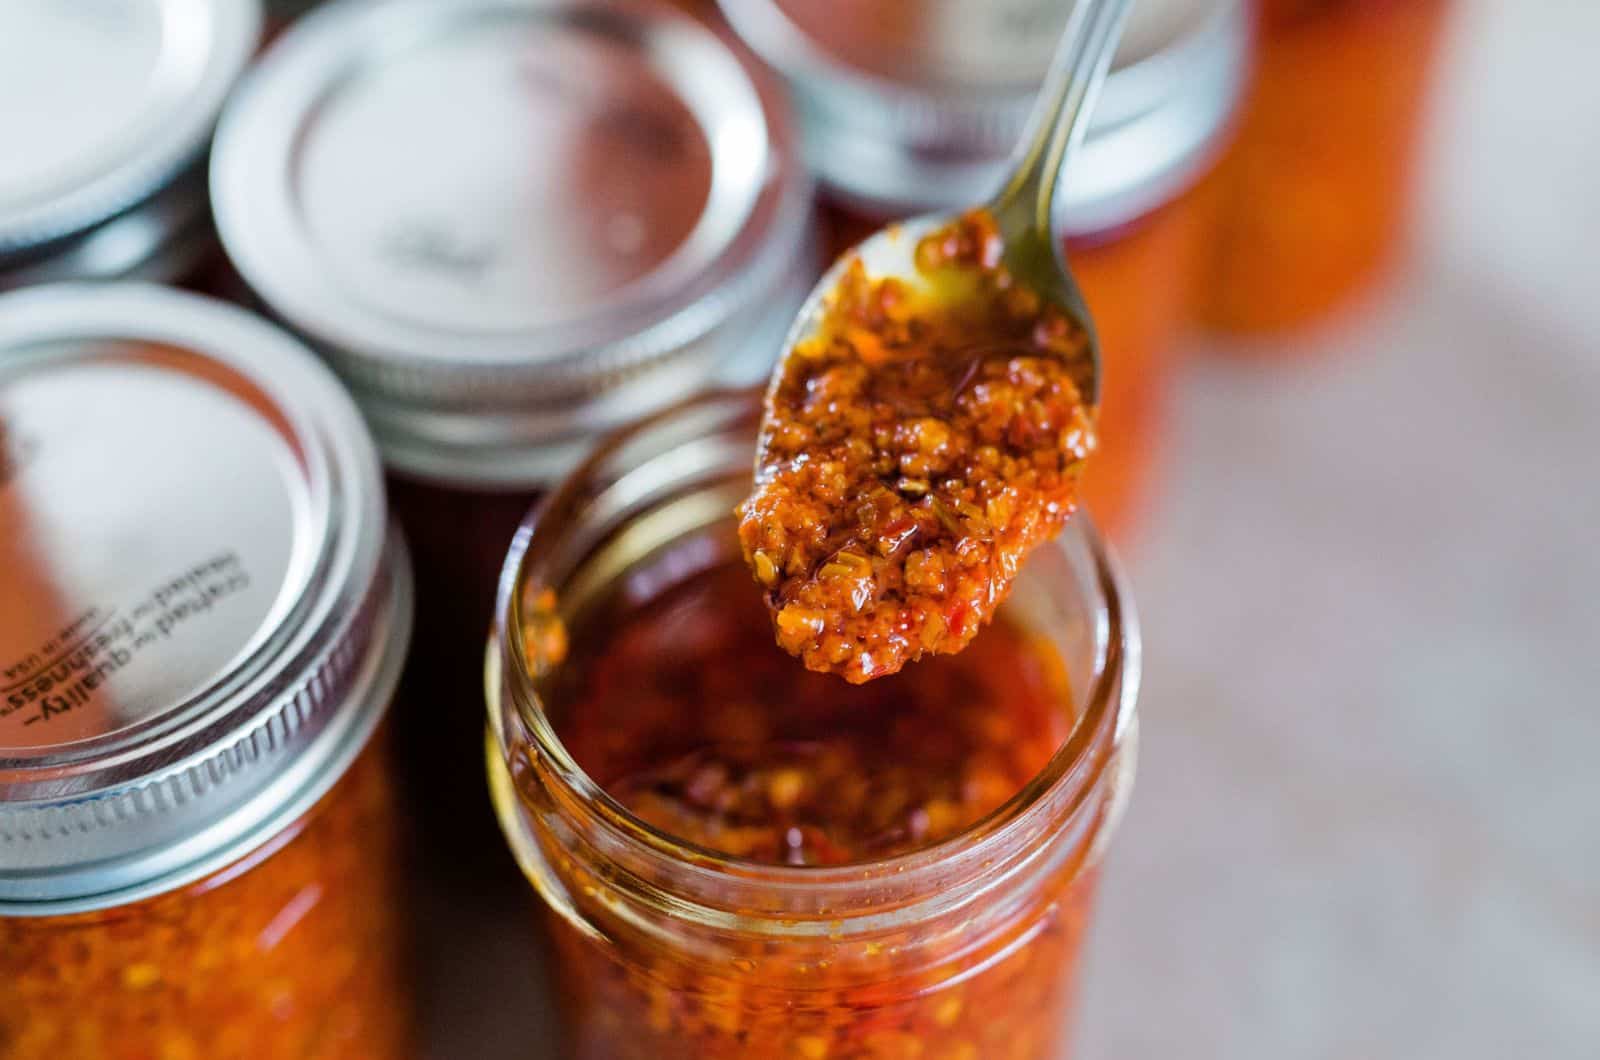 A spoon with Thai Chili Paste 